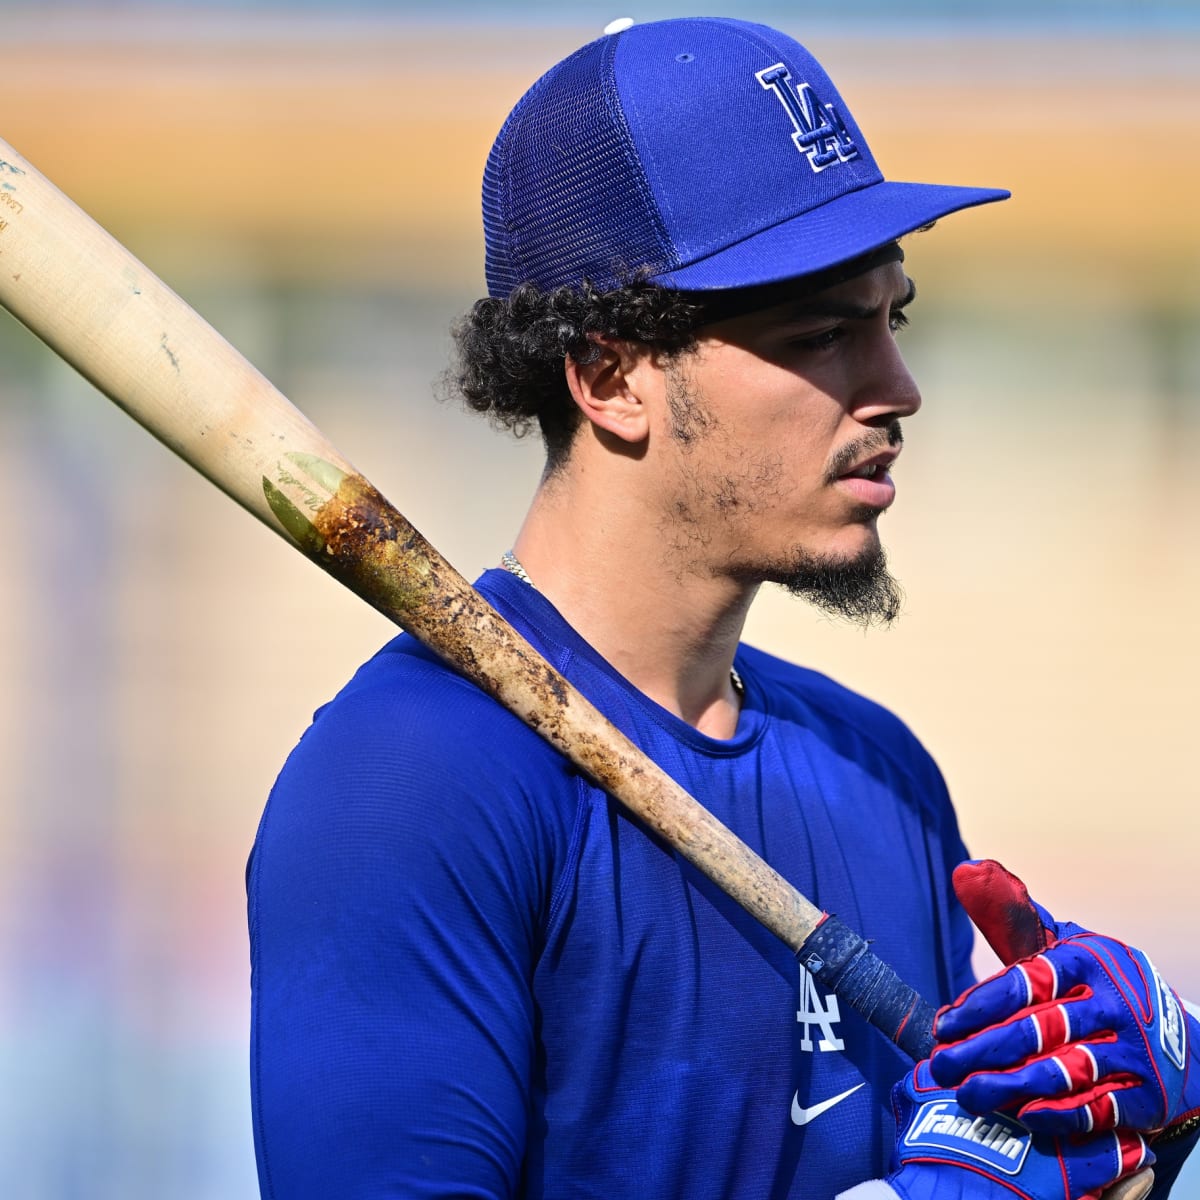 Dodgers option slumping rookie Miguel Vargas. So who plays second